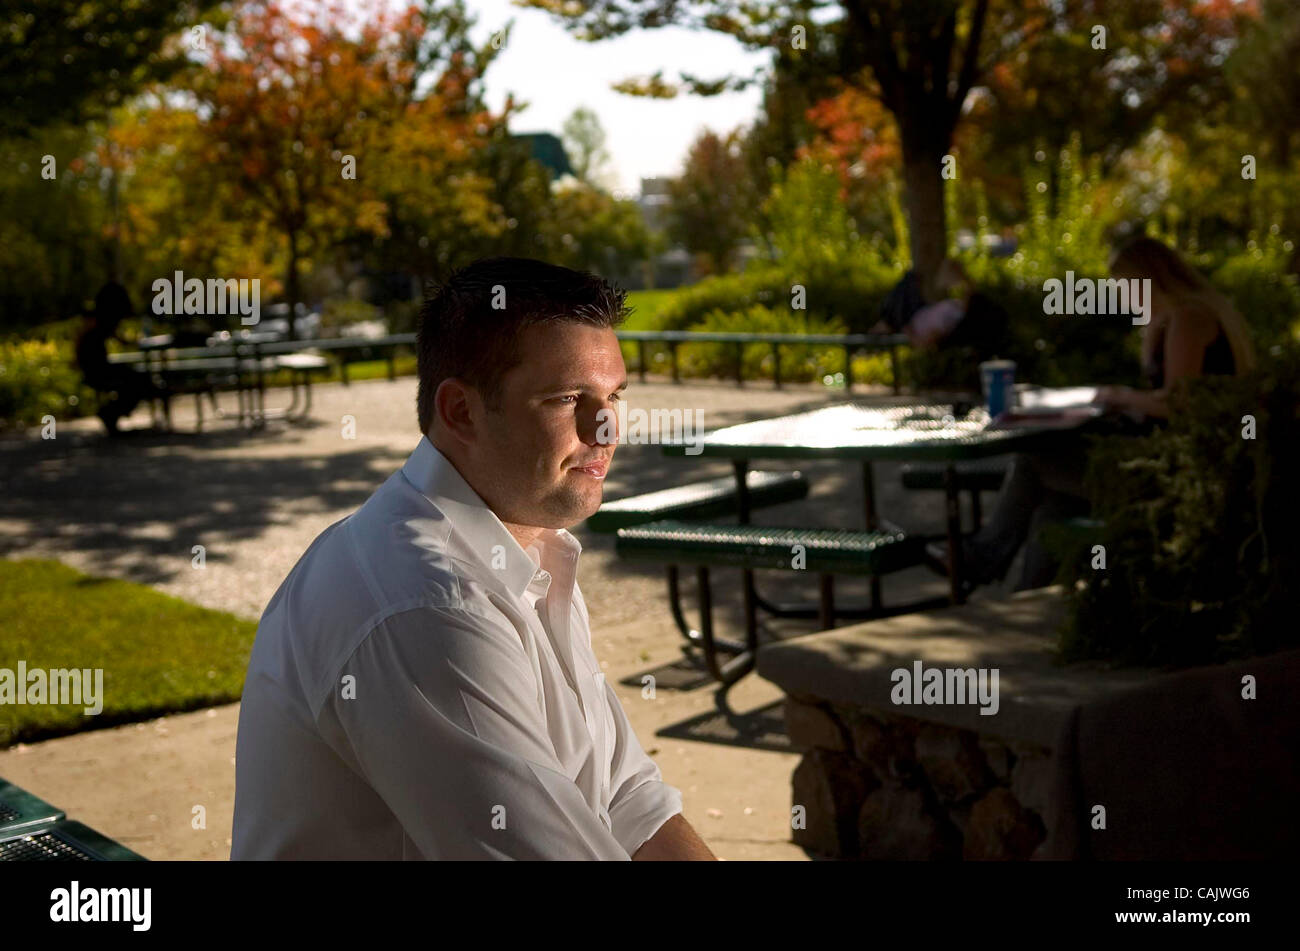 Iraq war veteran Kyle Williams is now enrolled at Sierra College in Rocklin. For many veterans, enrolling in college has been difficult as they battle bureaucracy and the stigma of serving in an increasingly unpopular war. The Sacramento Bee/Anne Chadwick Williams/ 9-27-07 Stock Photo